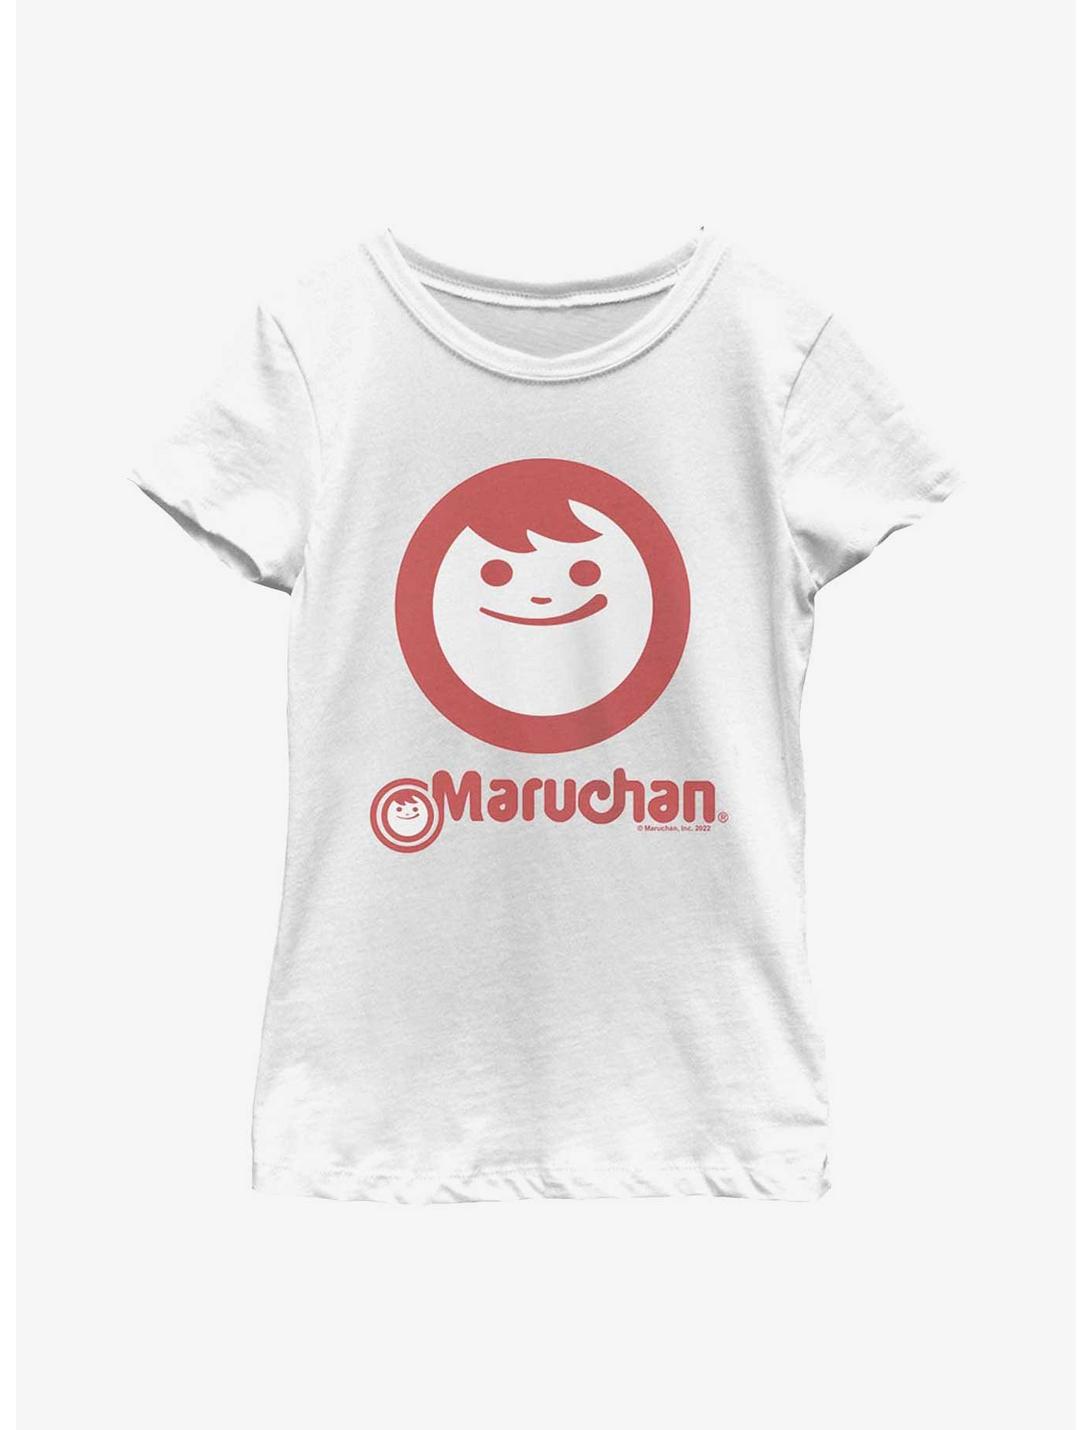 Maruchan Instant Smile Youth Girls T-Shirt, WHITE, hi-res